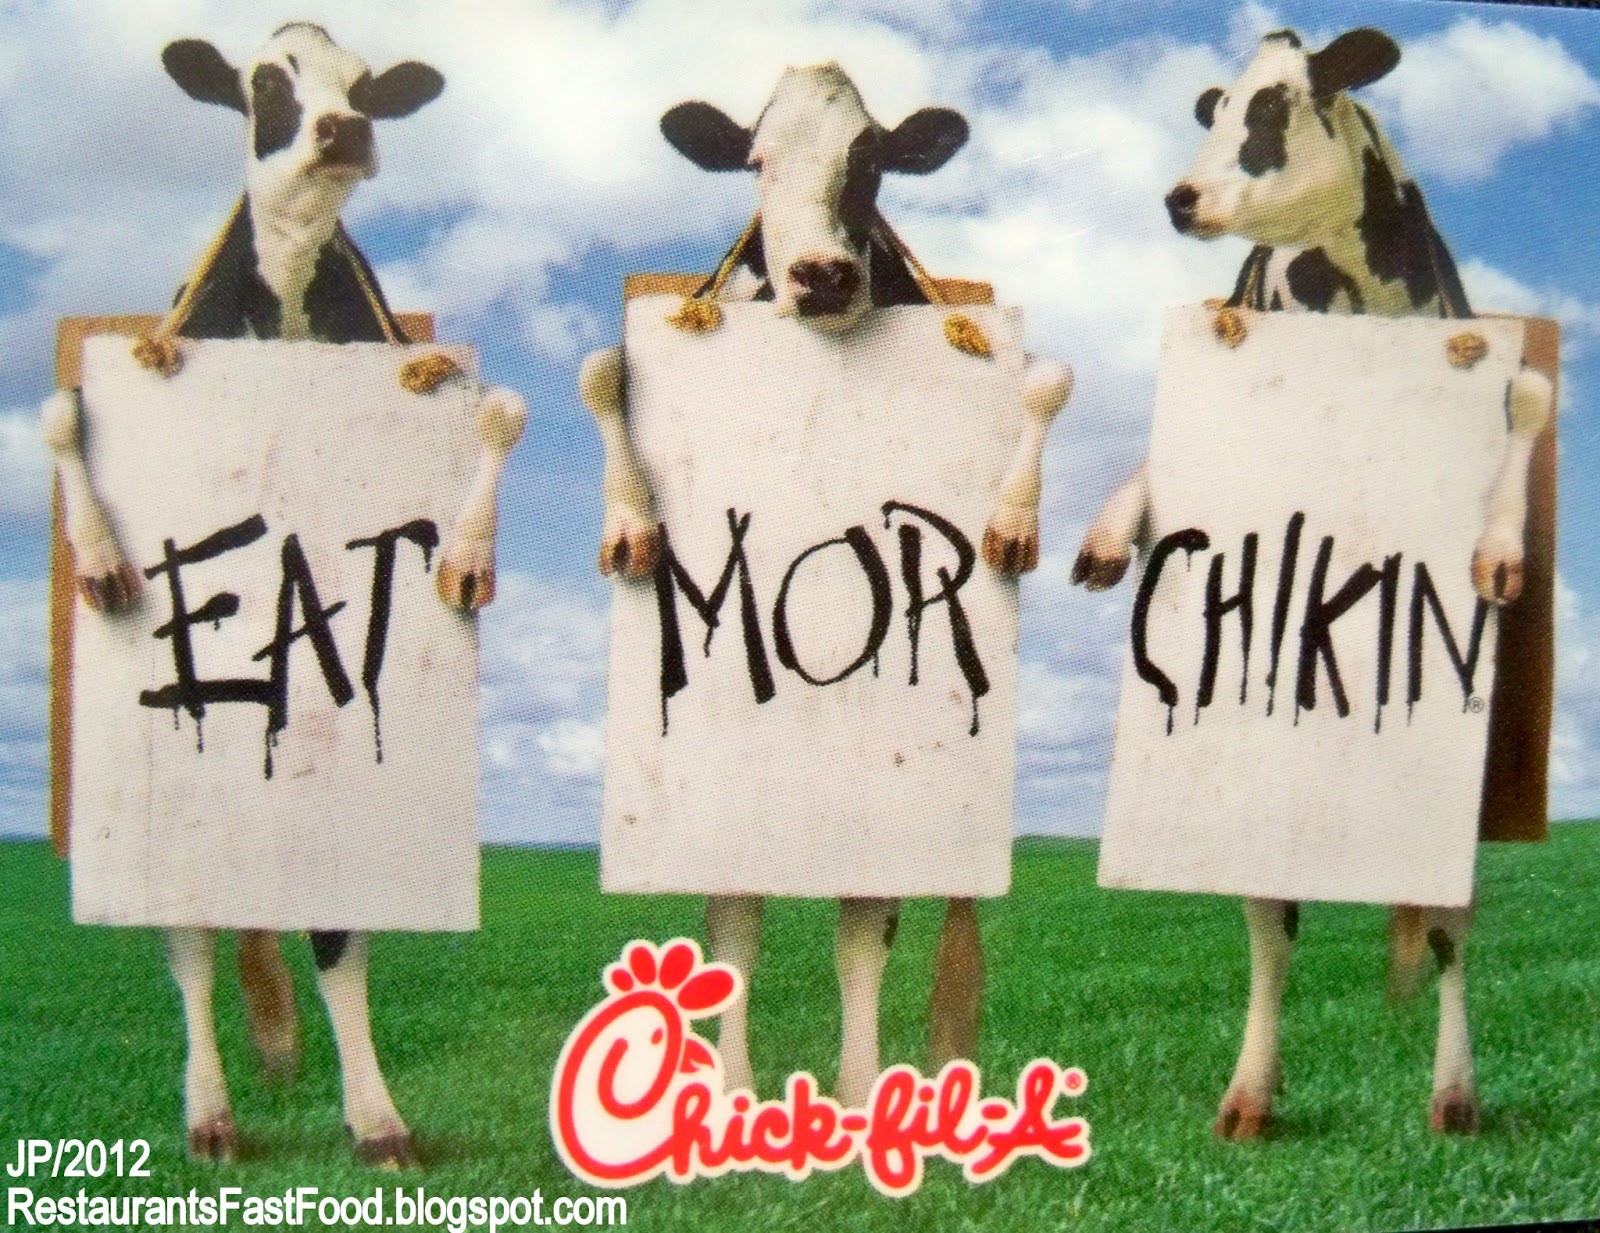 CHICK-FIL-A+Gift+Card,+Chick+fil+A+Fast+Food+Chicken+Sandwich+Restaurants+Cow+Sign+Boards.JPG